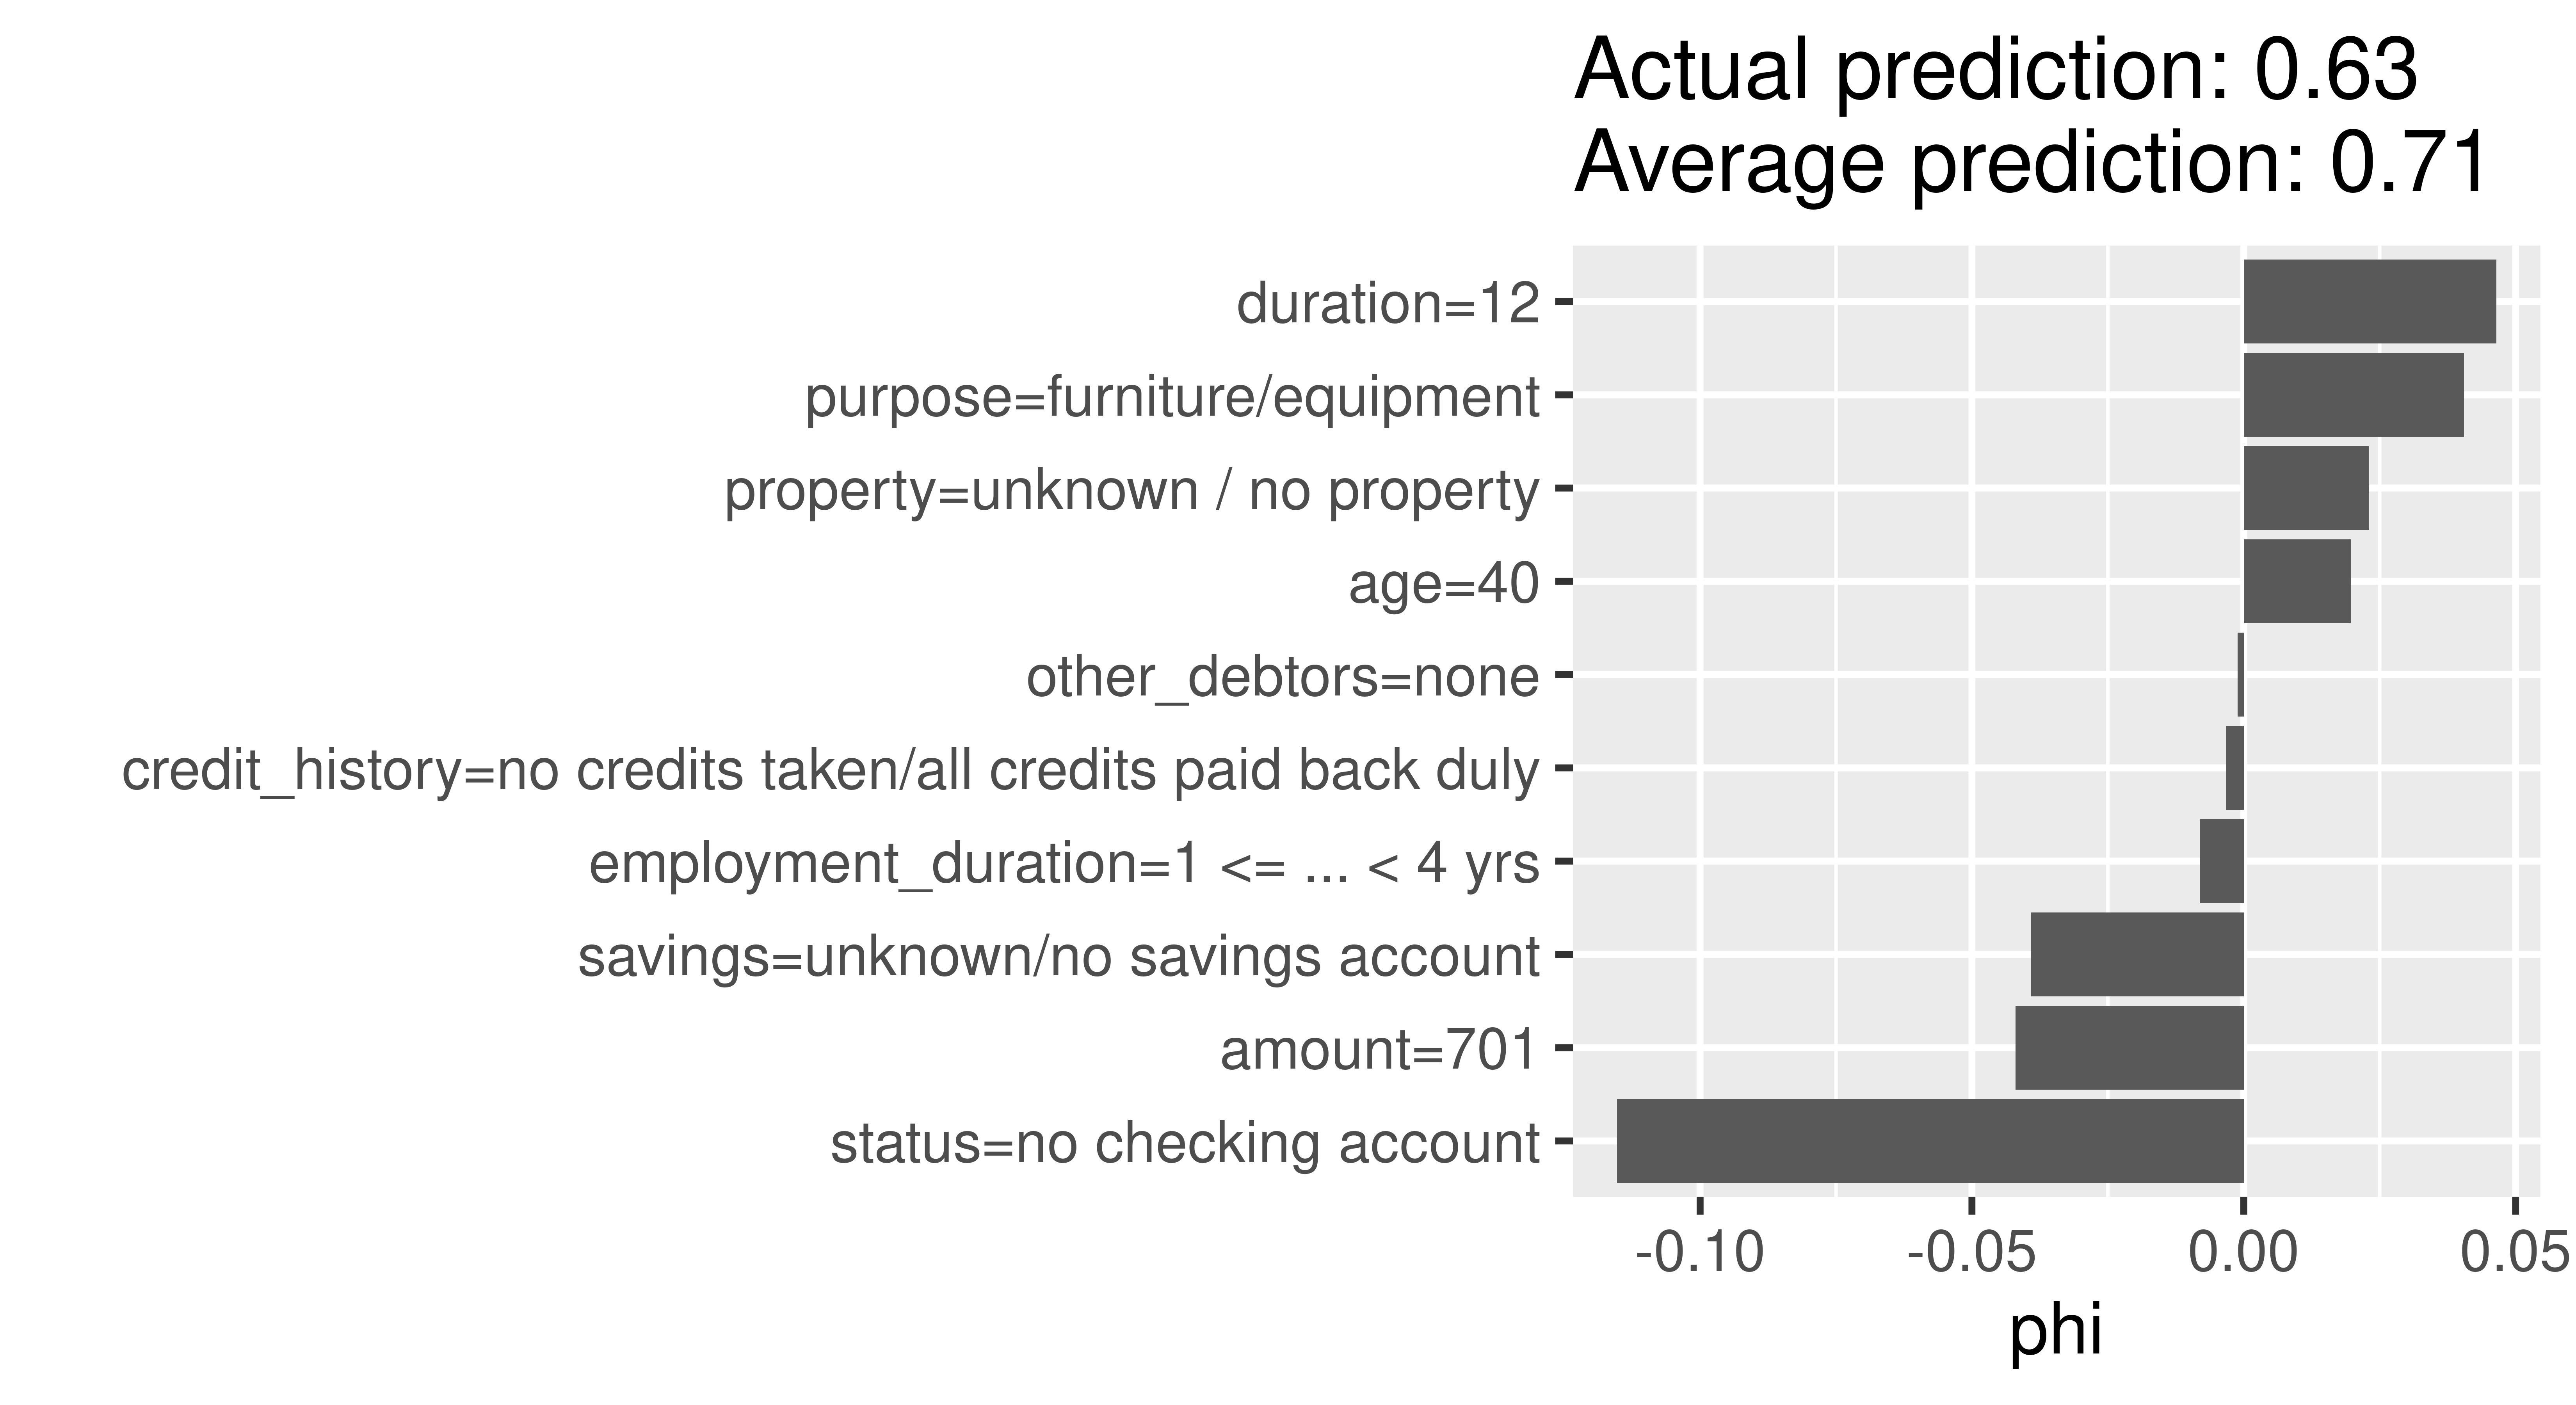 10 bar plots of Shapley values, one for each feature. x-axis says 'phi' and ranges from -0.1 to 0.05. The strongest positive contributions are from the `duration`, `purpose` and `property` variables. The strongest negative contributions are `status`, `amount`, and `savings`.